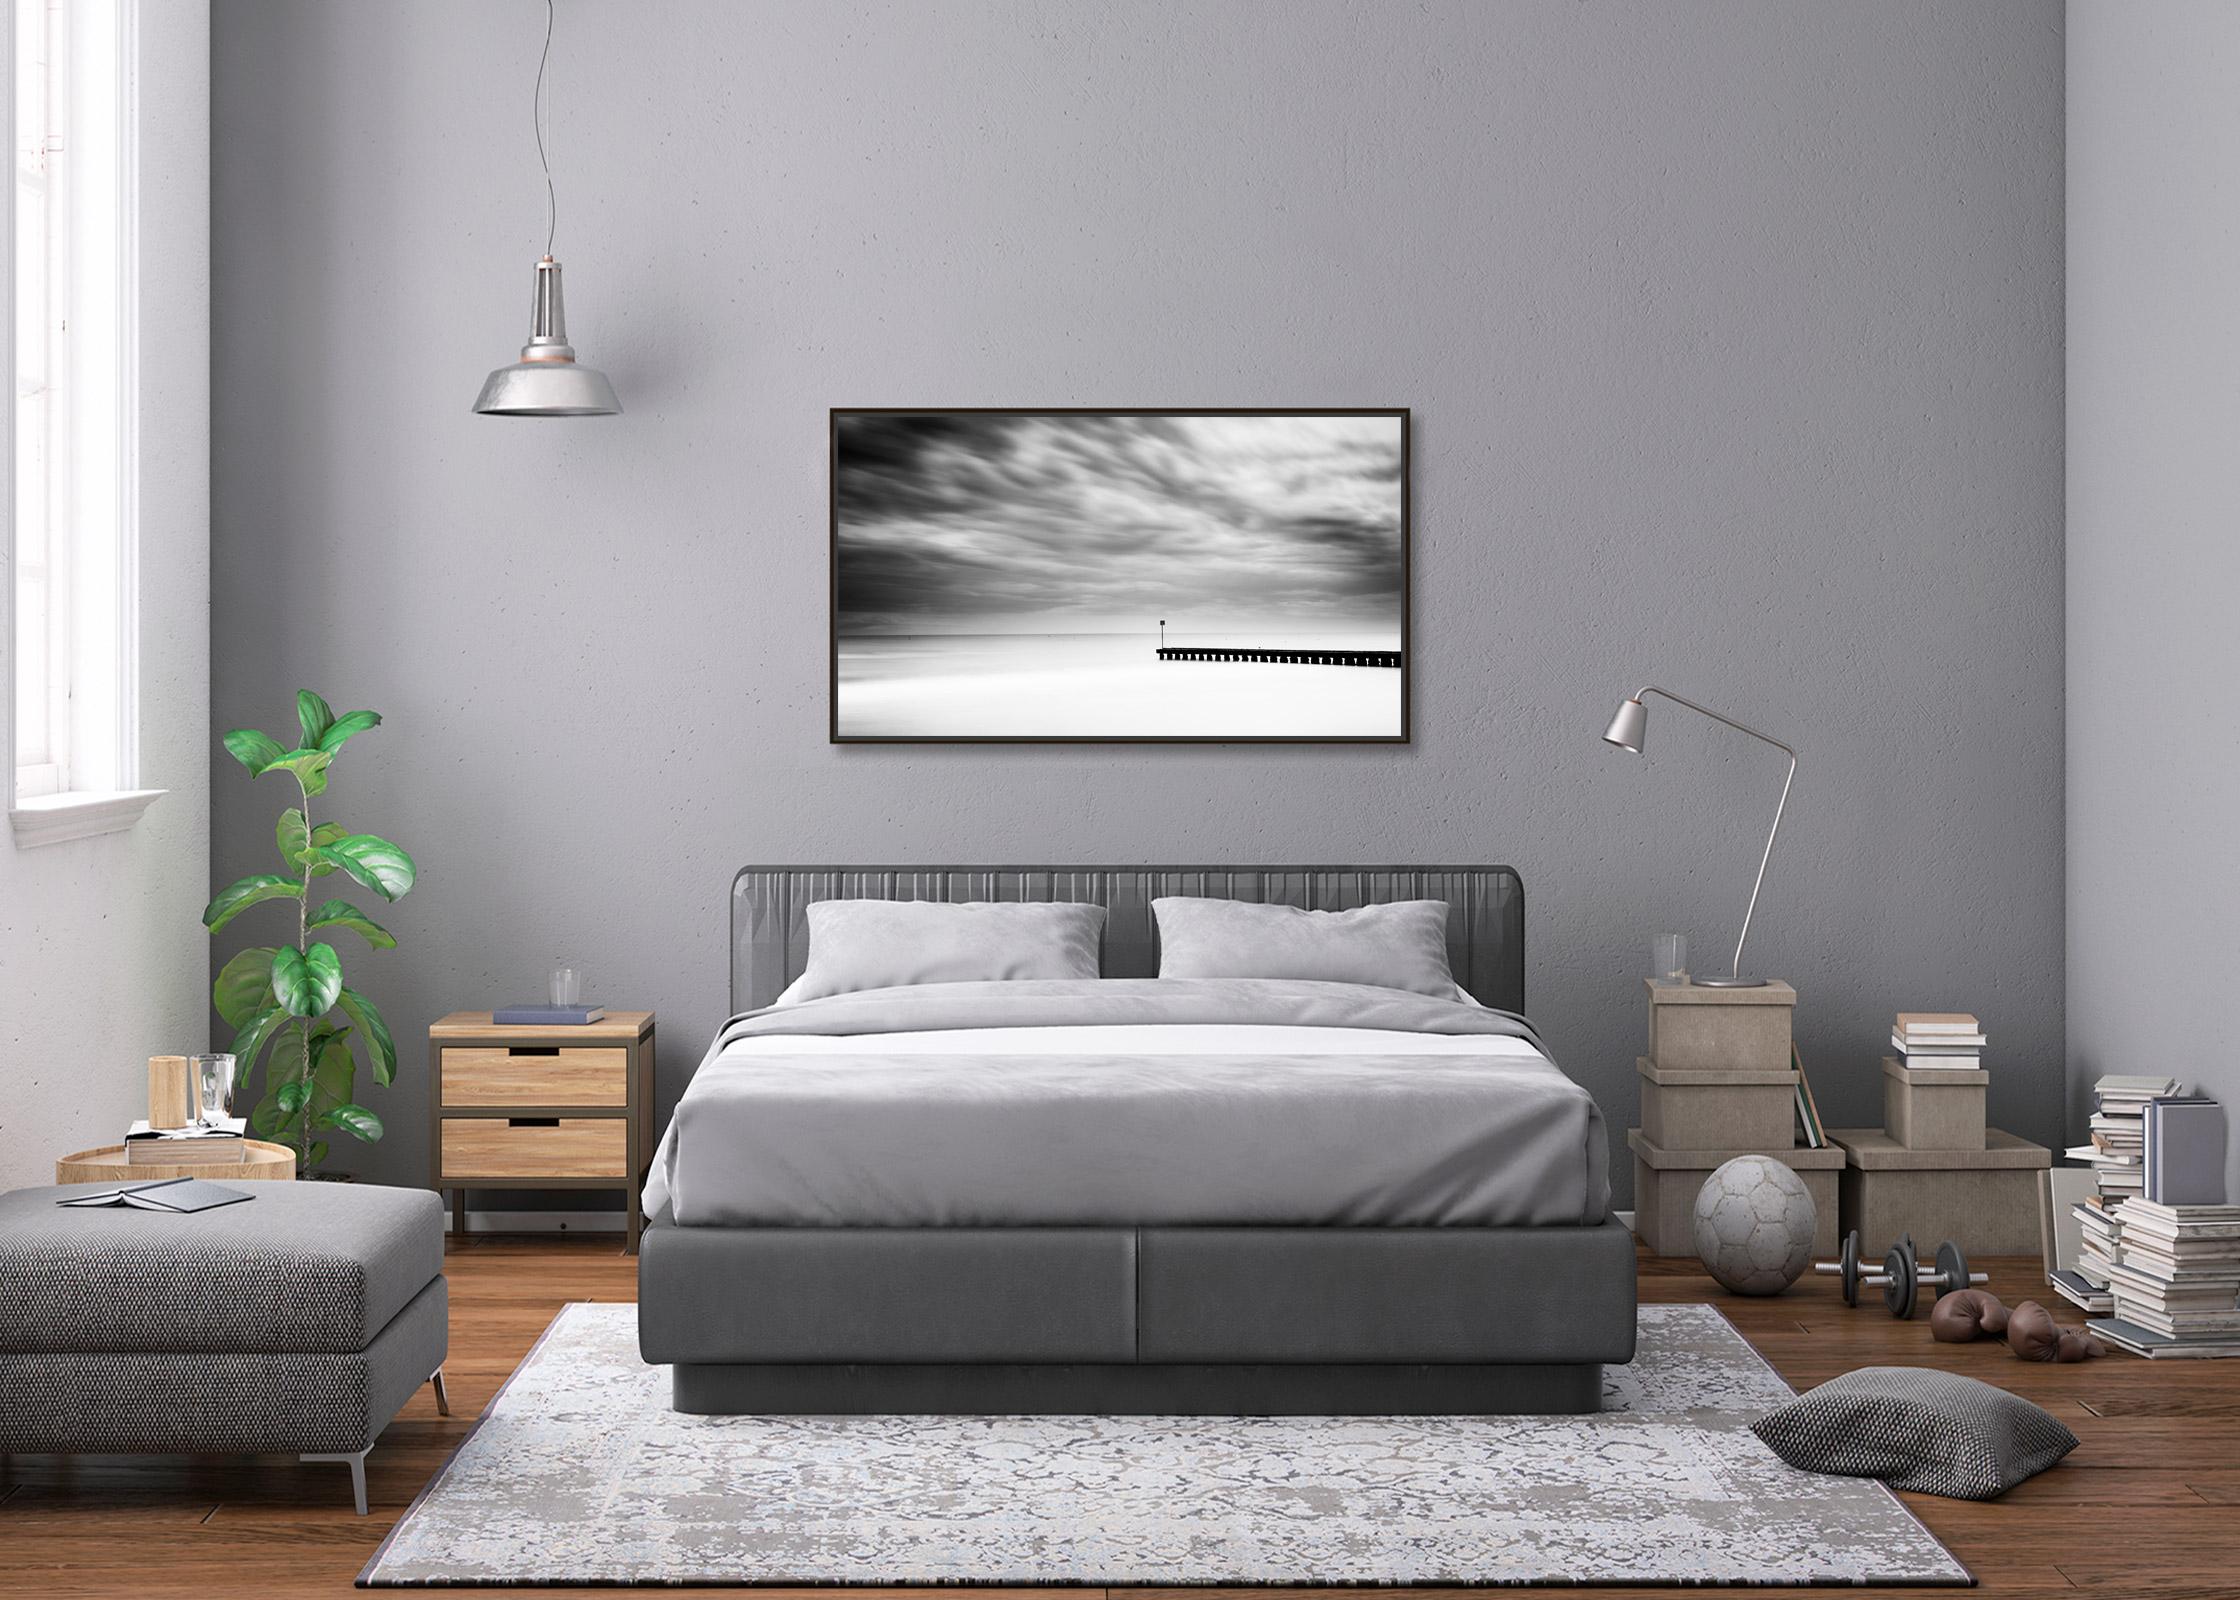 Black and white fine art panorama long exposure waterscape - landscape photography print. Archival pigment ink print, edition of 7. Signed, titled, dated and numbered by artist. Certificate of authenticity included. Printed with 4cm white